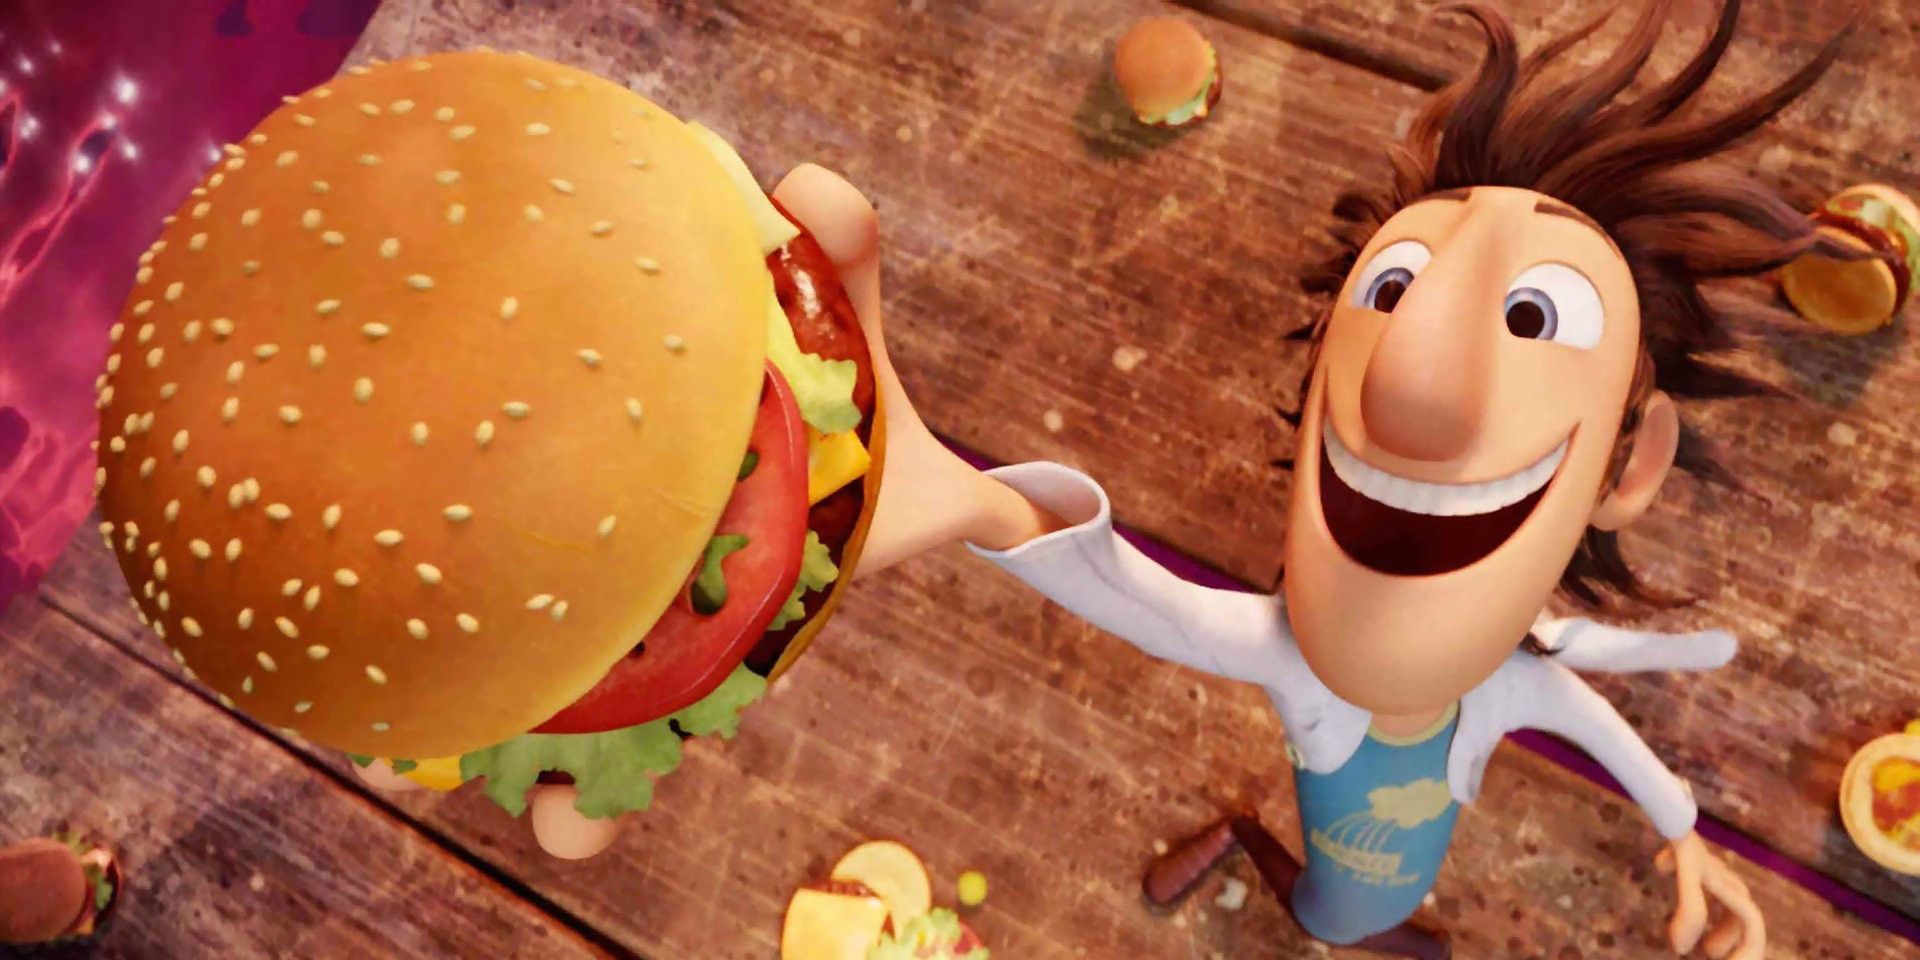 Flint smiling with a hamburger in his hand in Cloudy with a Chance of Meatballs